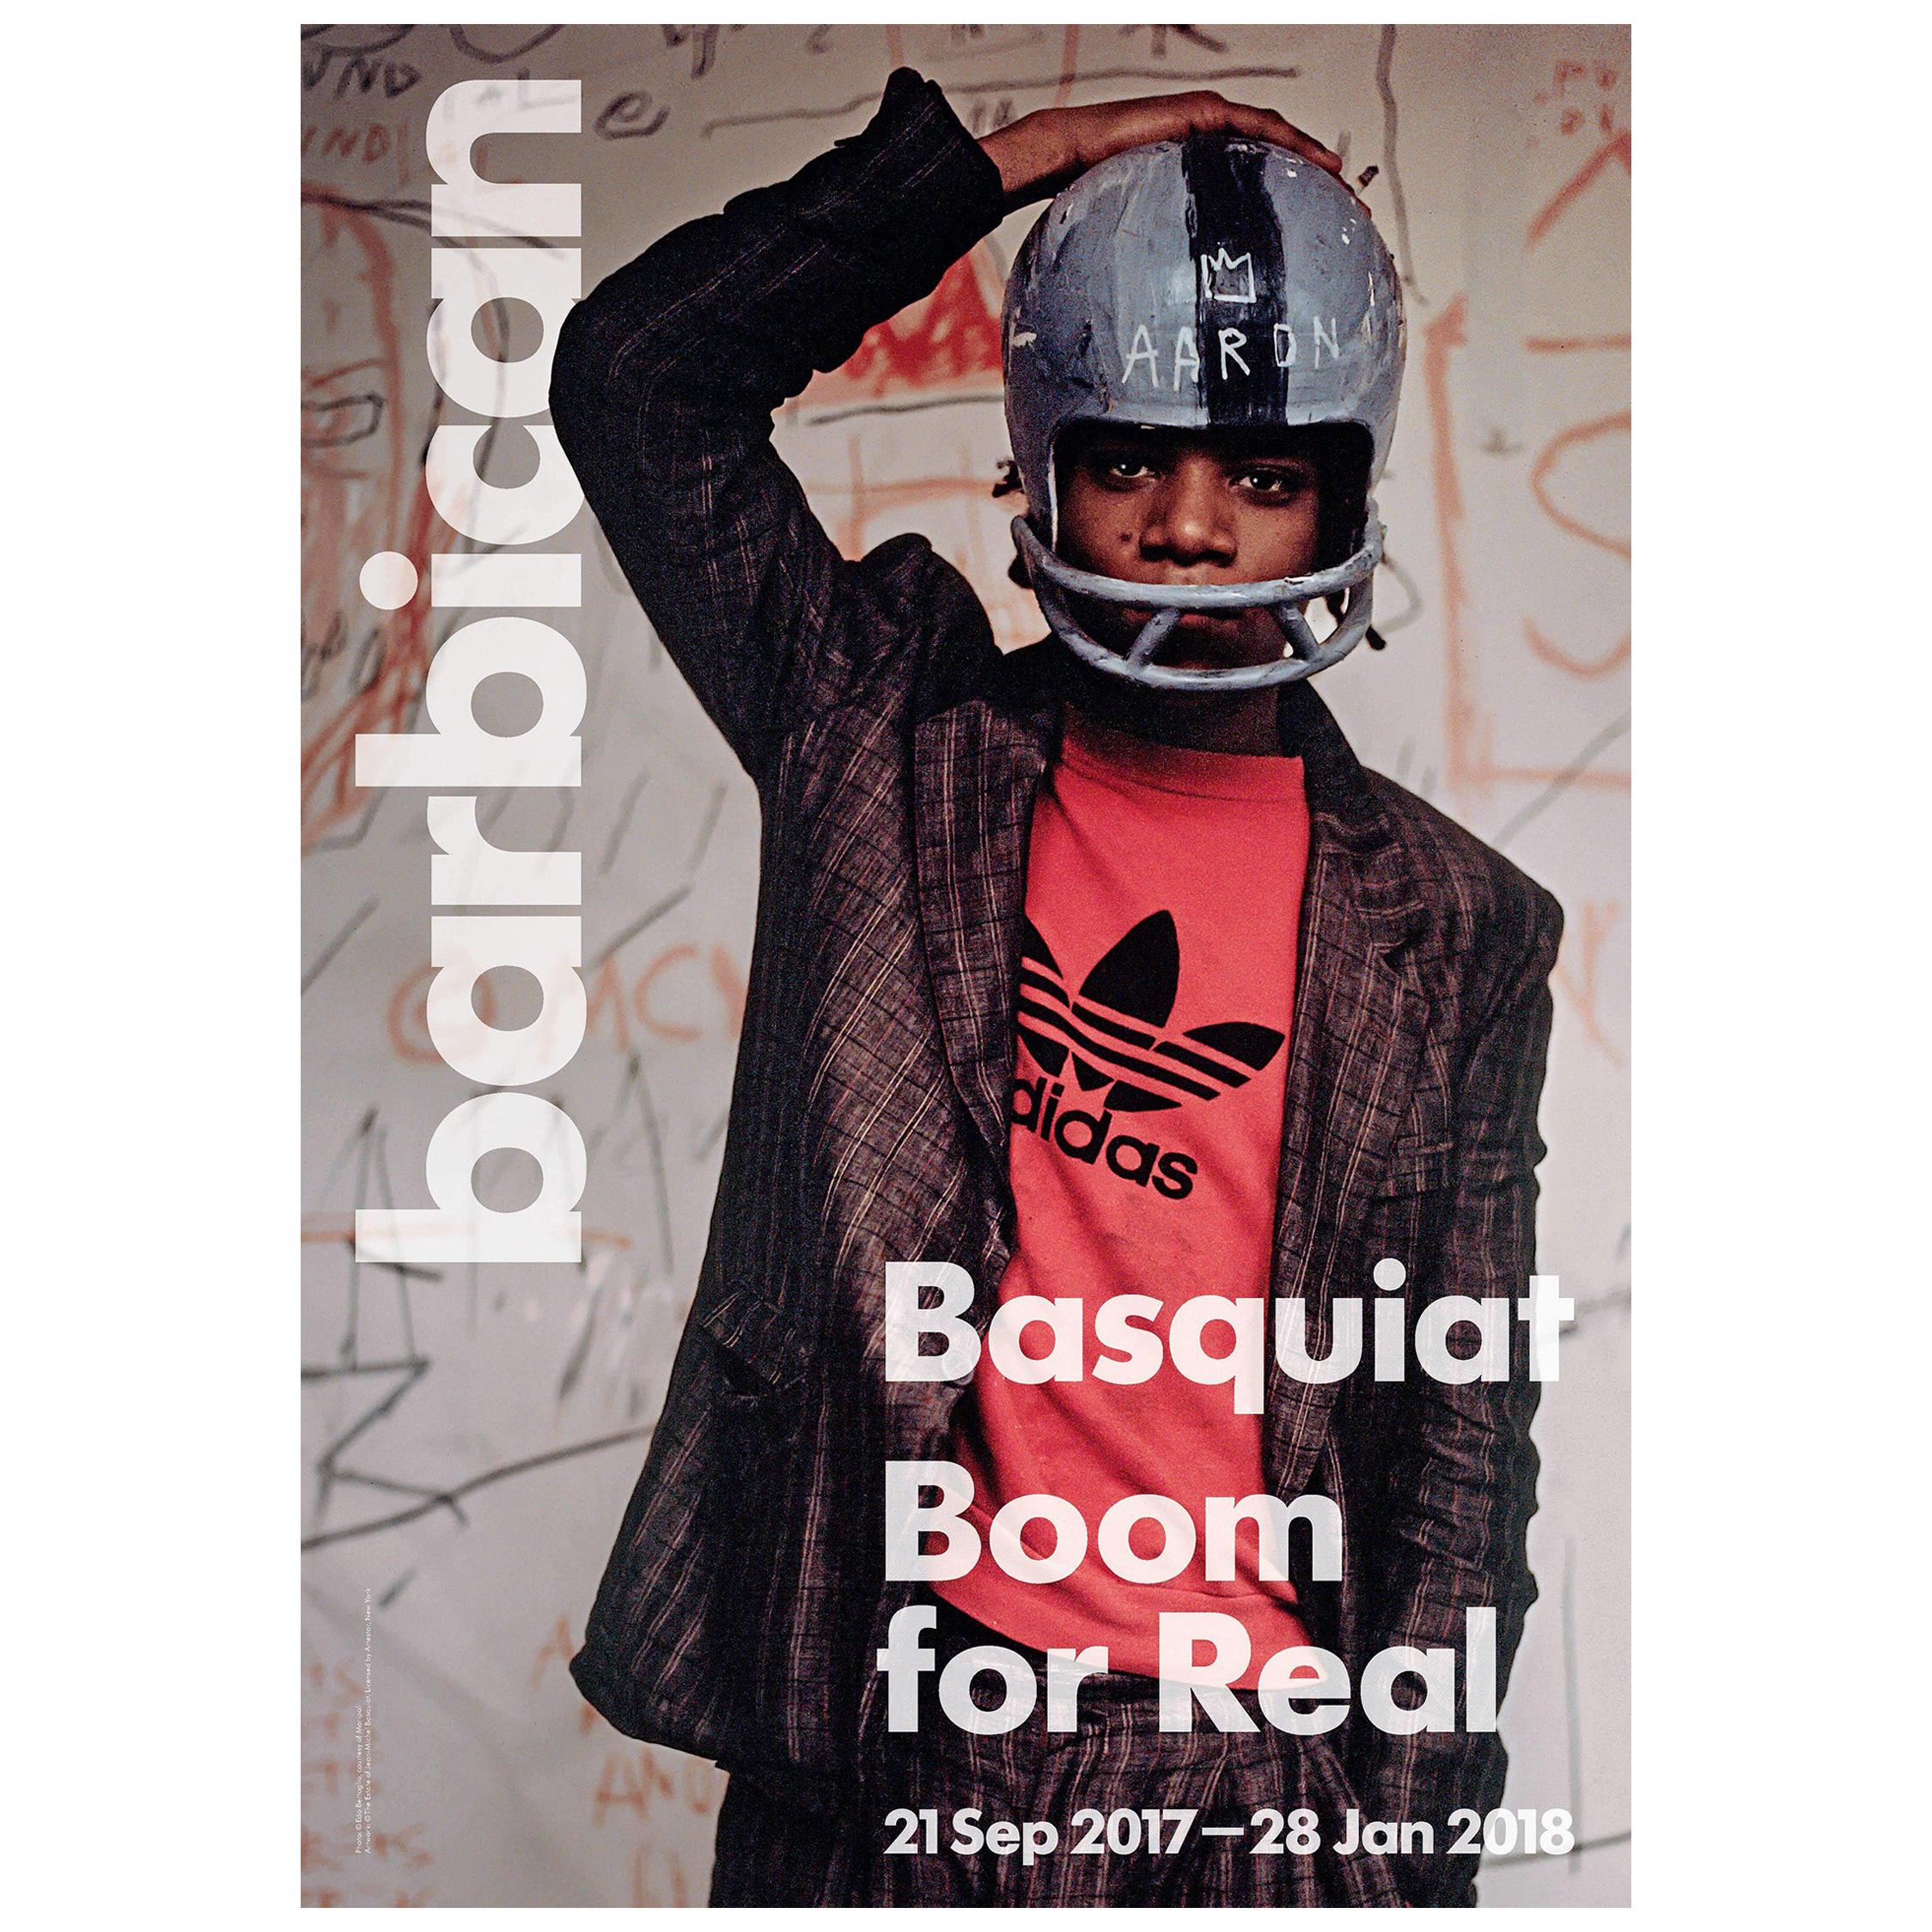 Basquiat Boom for Real Exhibition Poster London